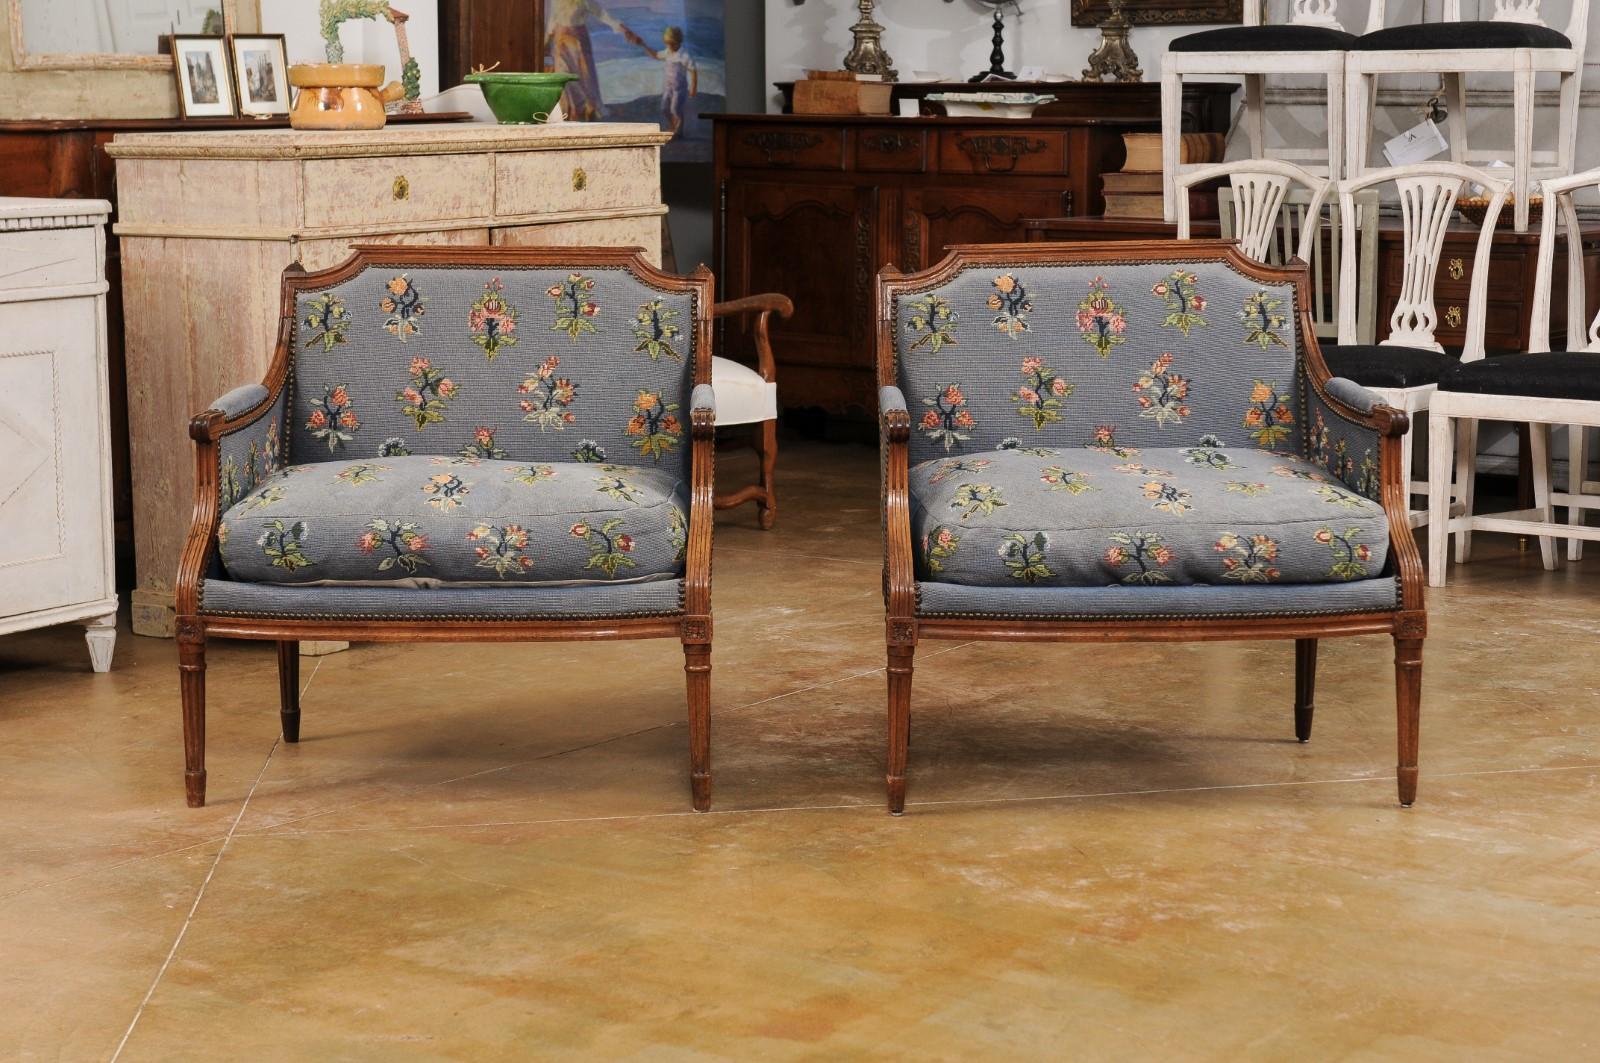 Pair of French Louis XVI Period 1790s Bergère Marquise Chairs with Upholstery For Sale 8